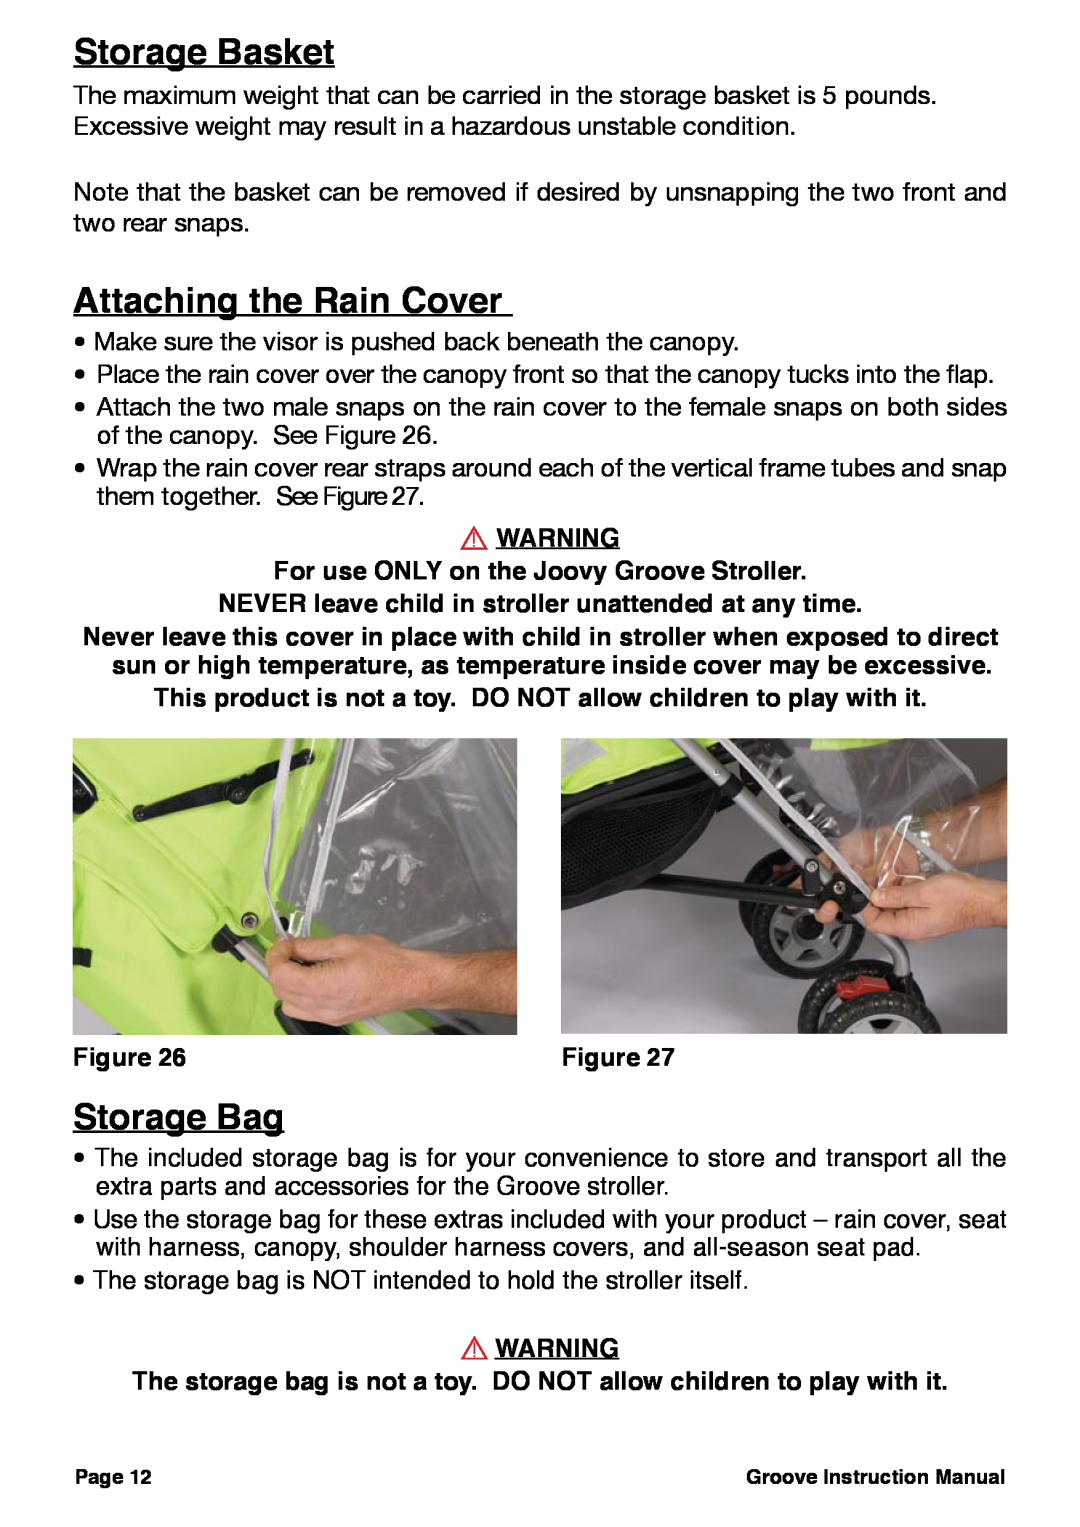 Joovy 352, 356, 350 Storage Basket, Attaching the Rain Cover, Storage Bag, For use ONLY on the Joovy Groove Stroller 